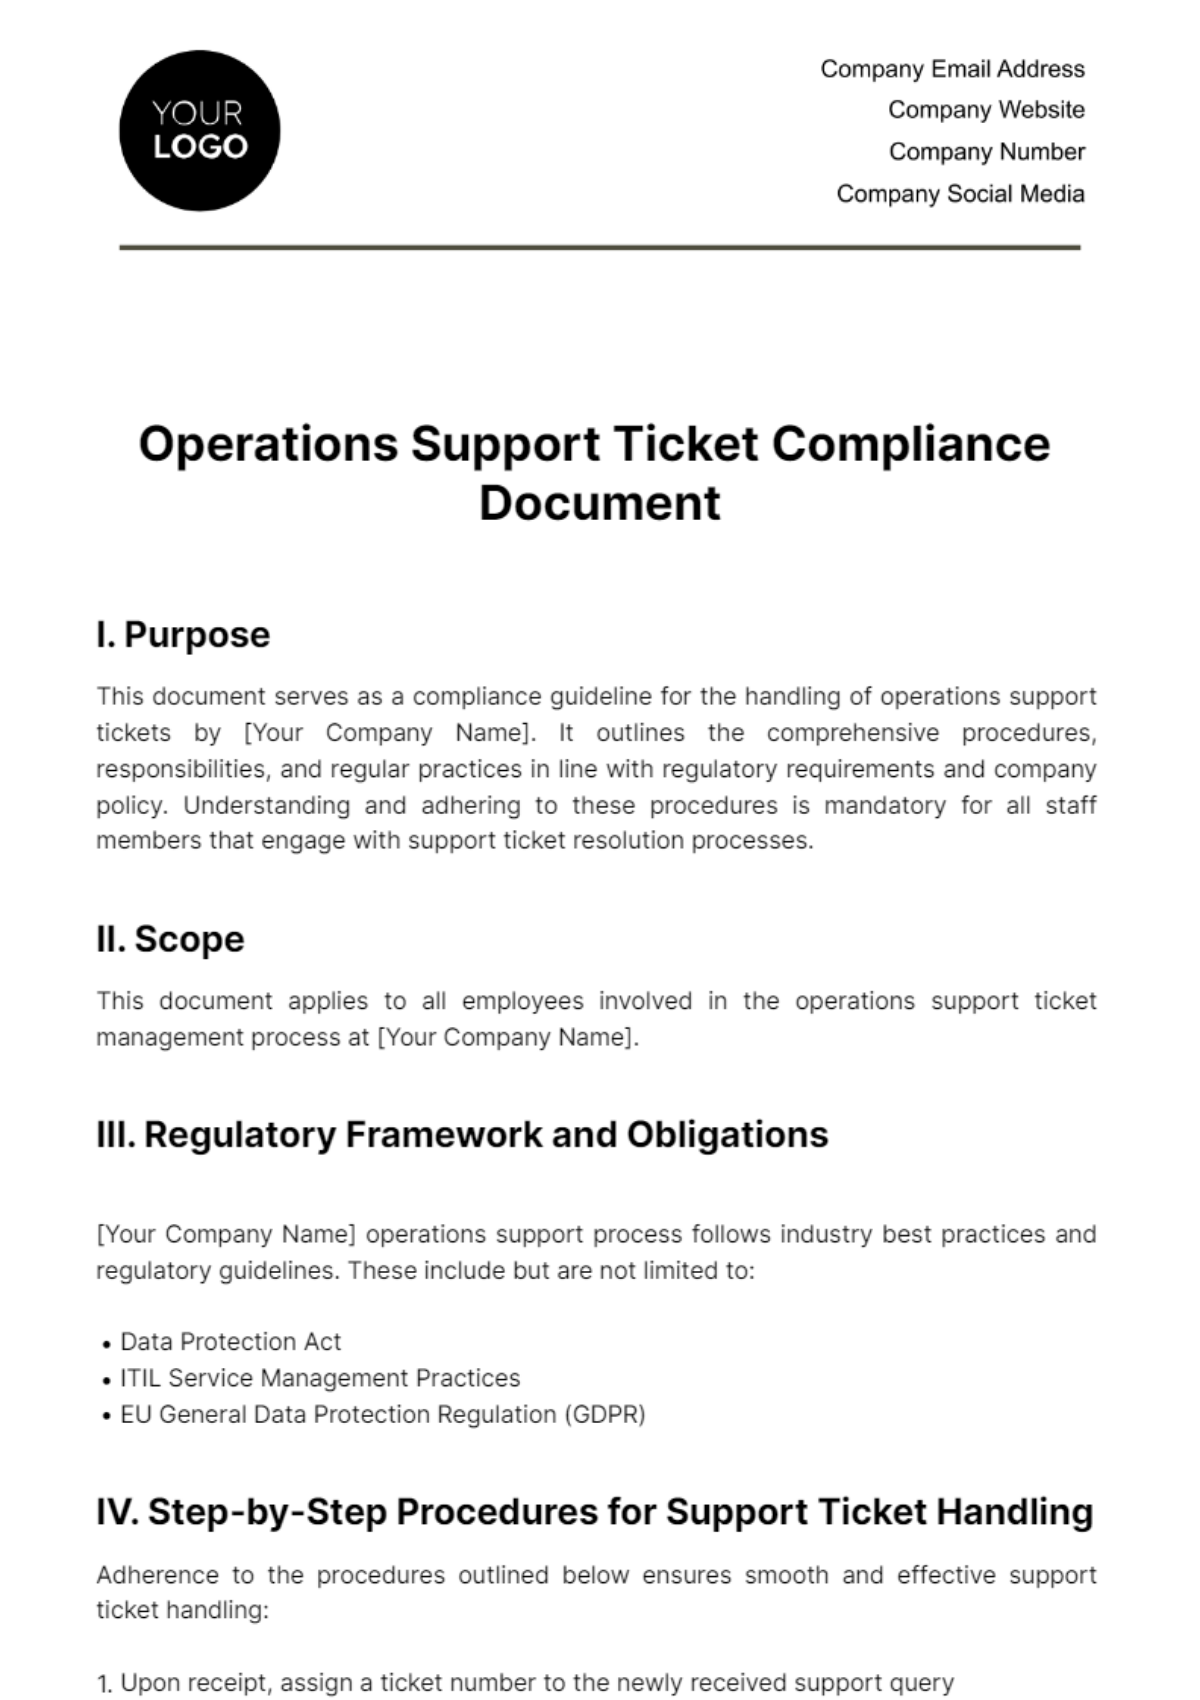 Free Operations Support Ticket Compliance Document Template